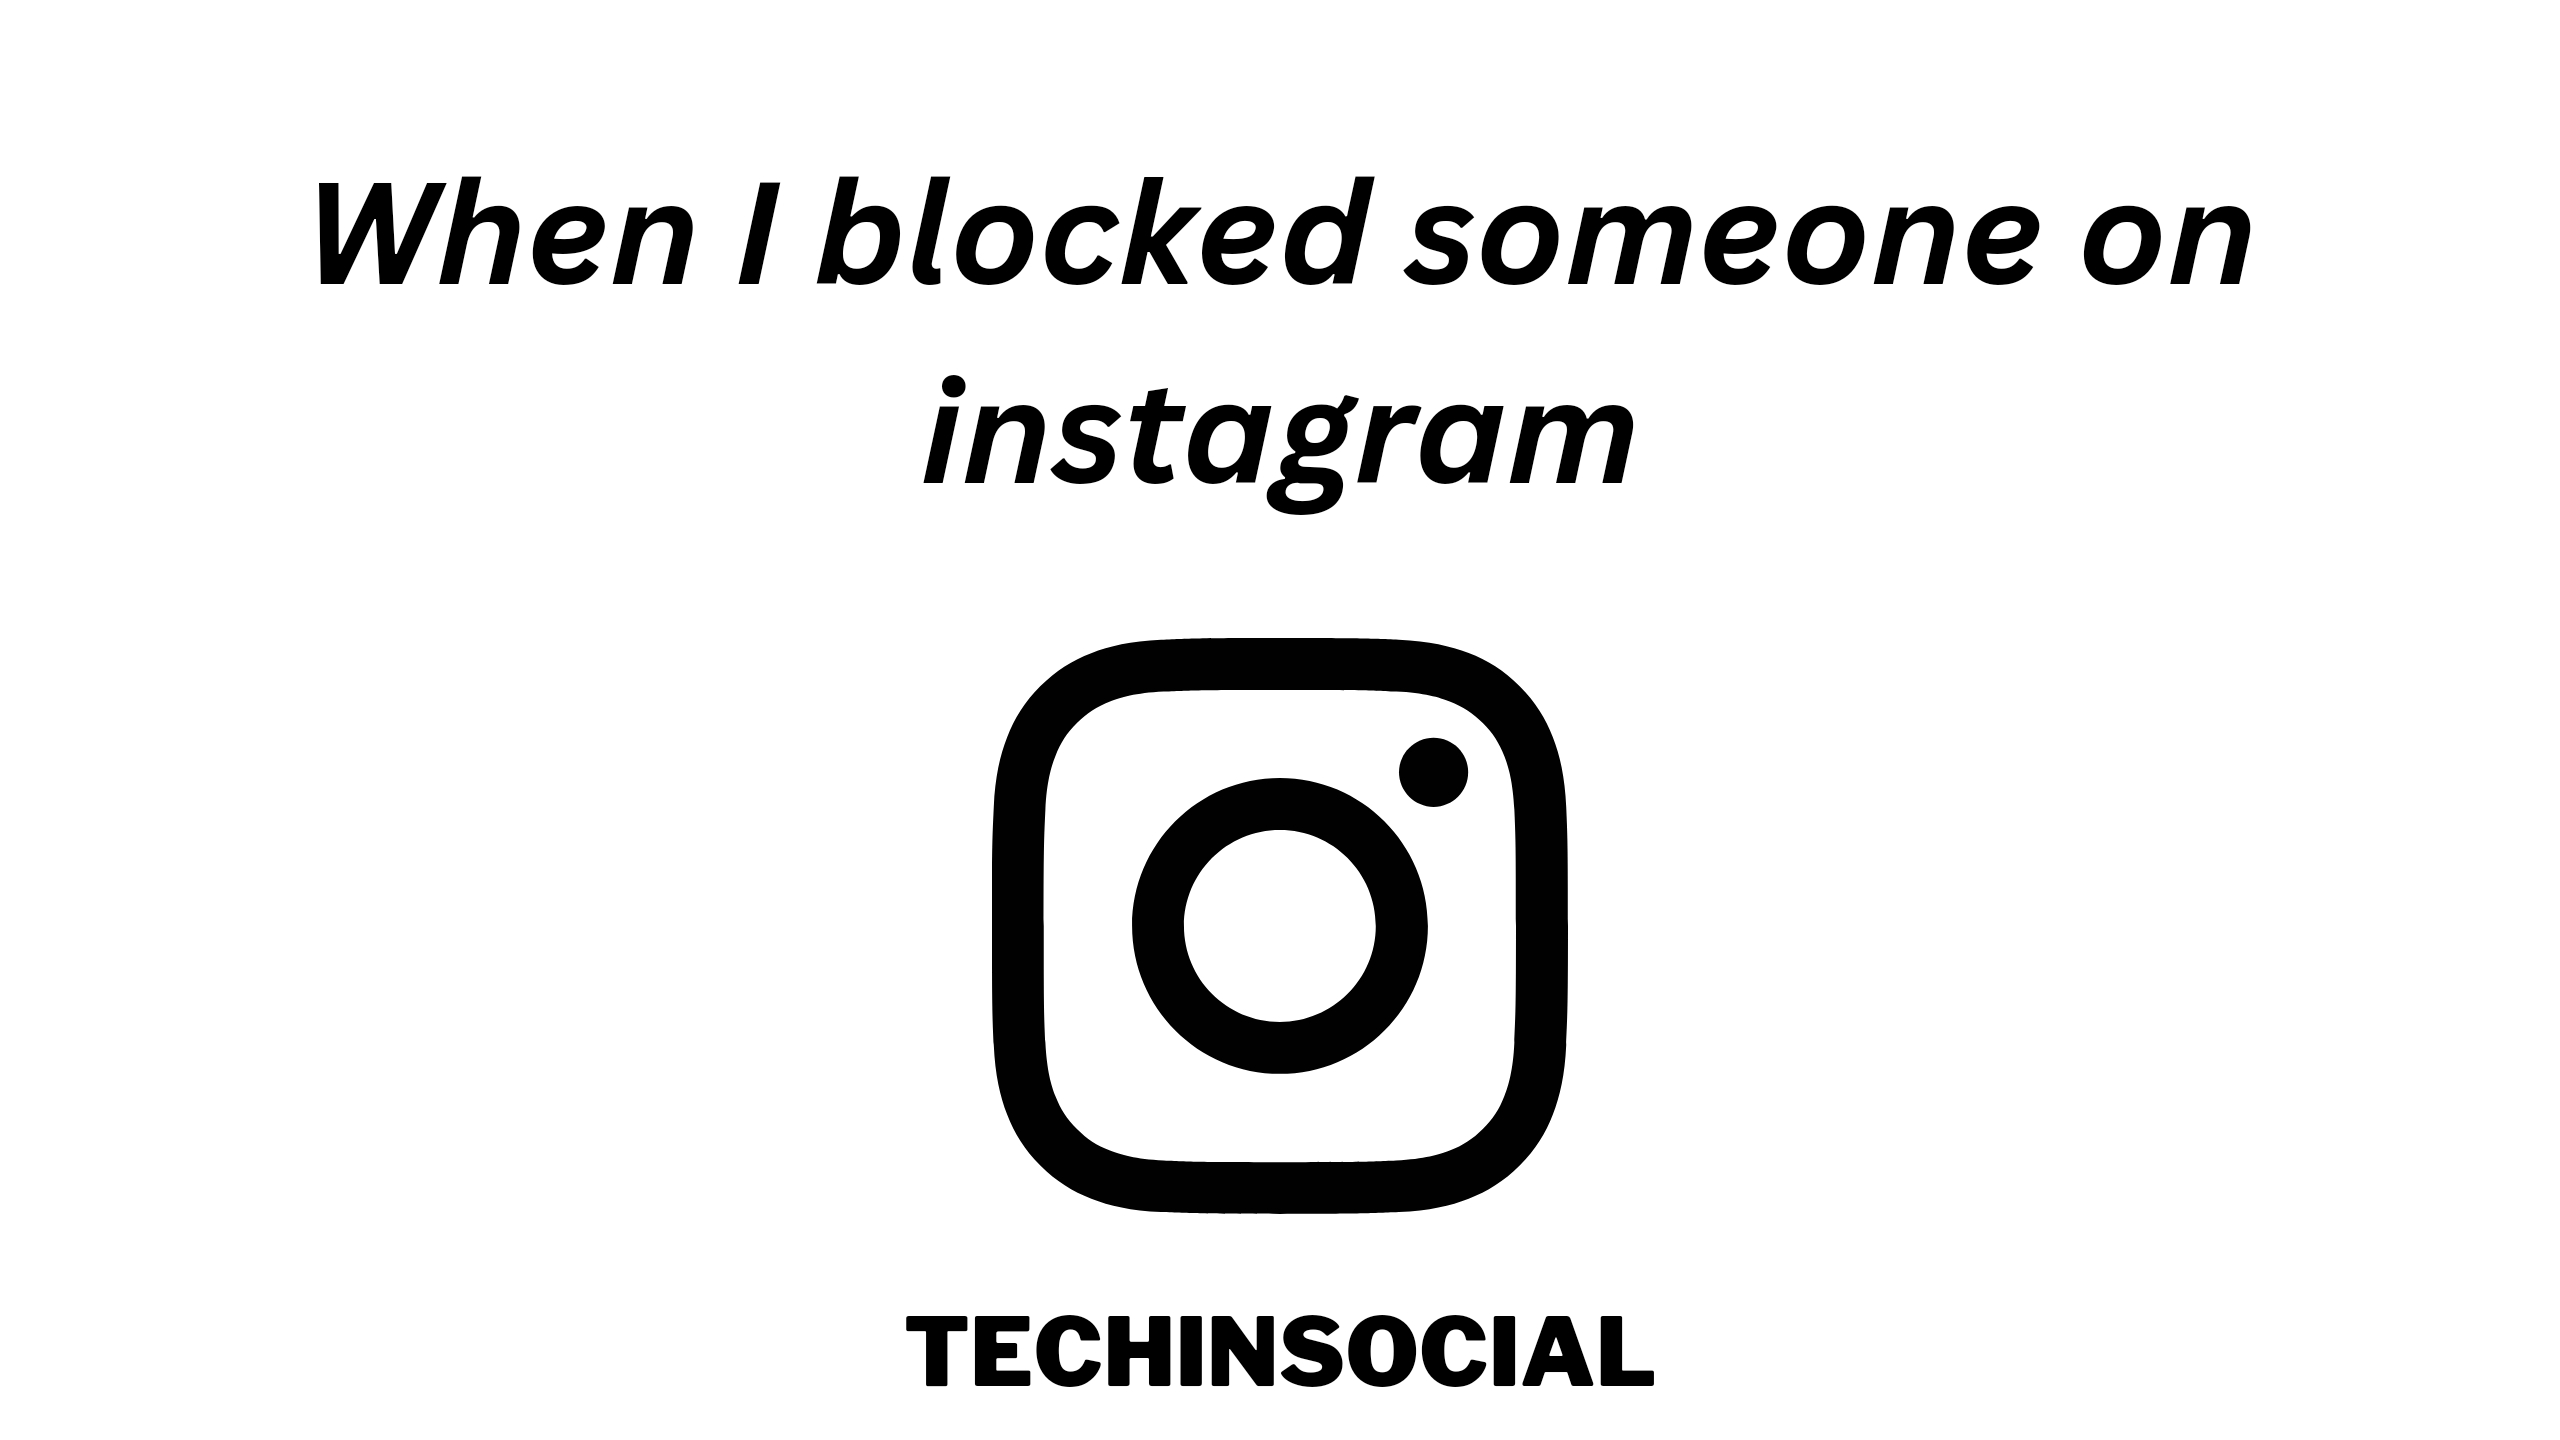 How to know when I blocked someone on Instagram